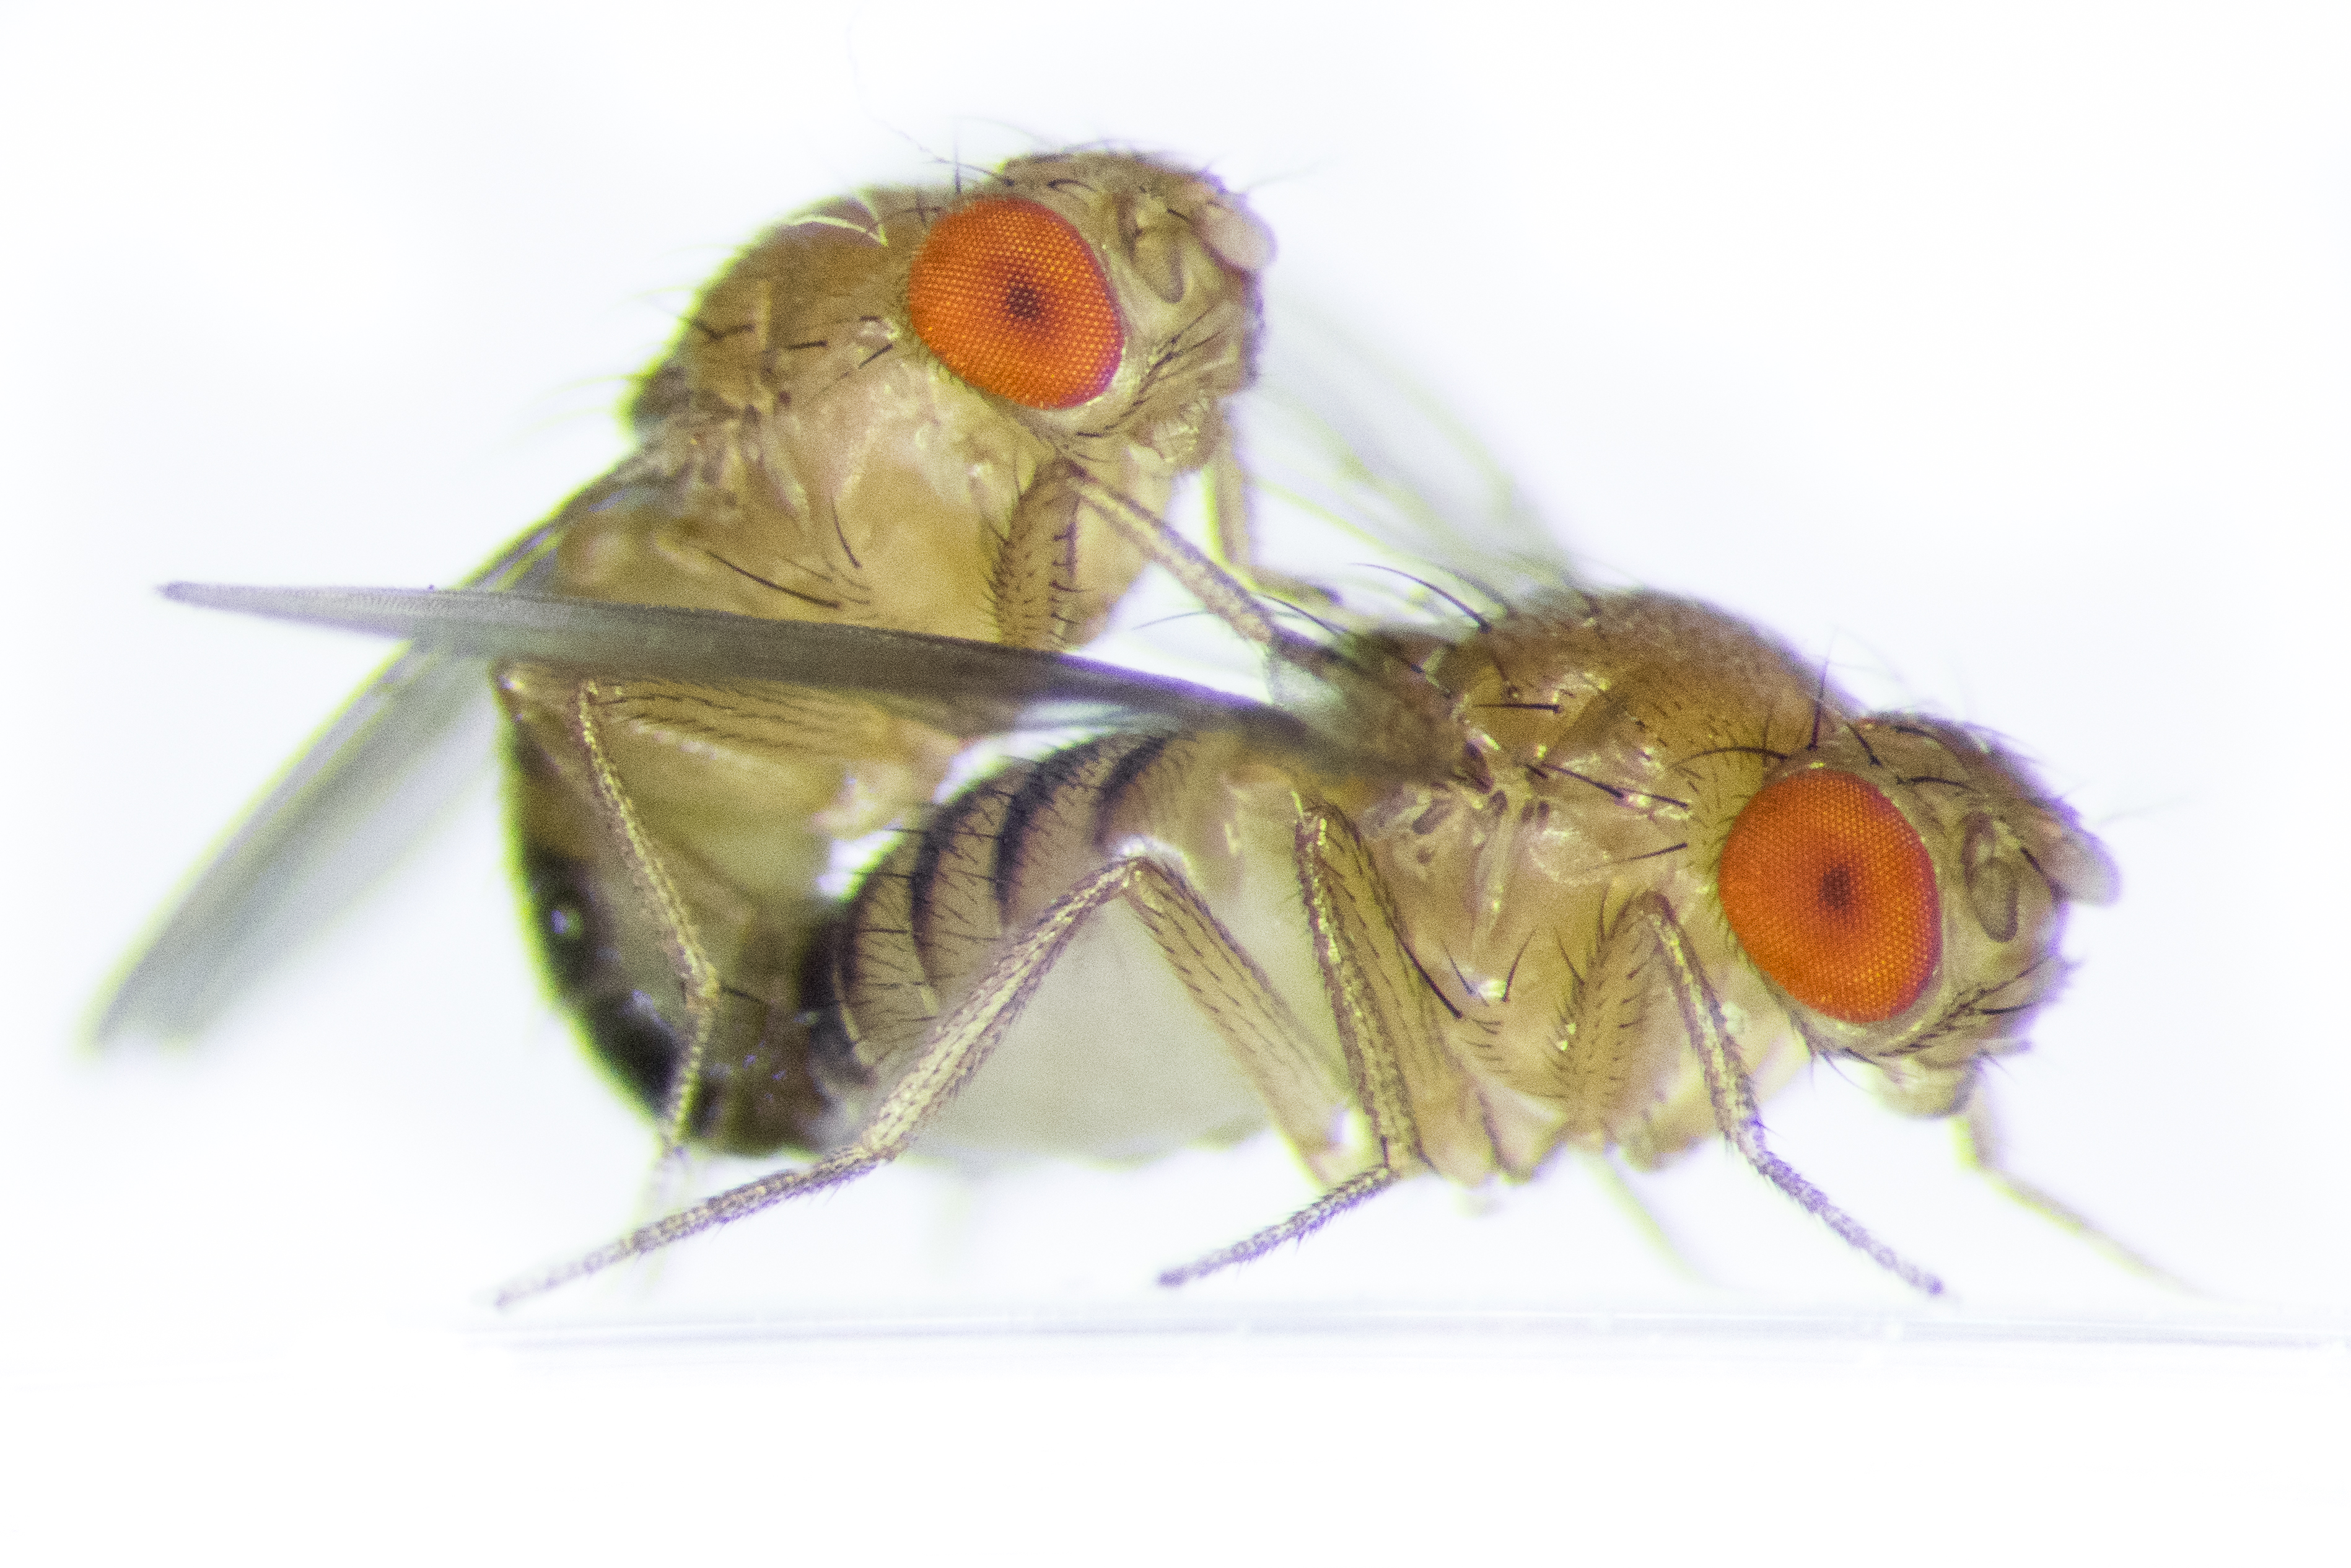 Fruit fly promiscuity alters the evolutionary forces on males